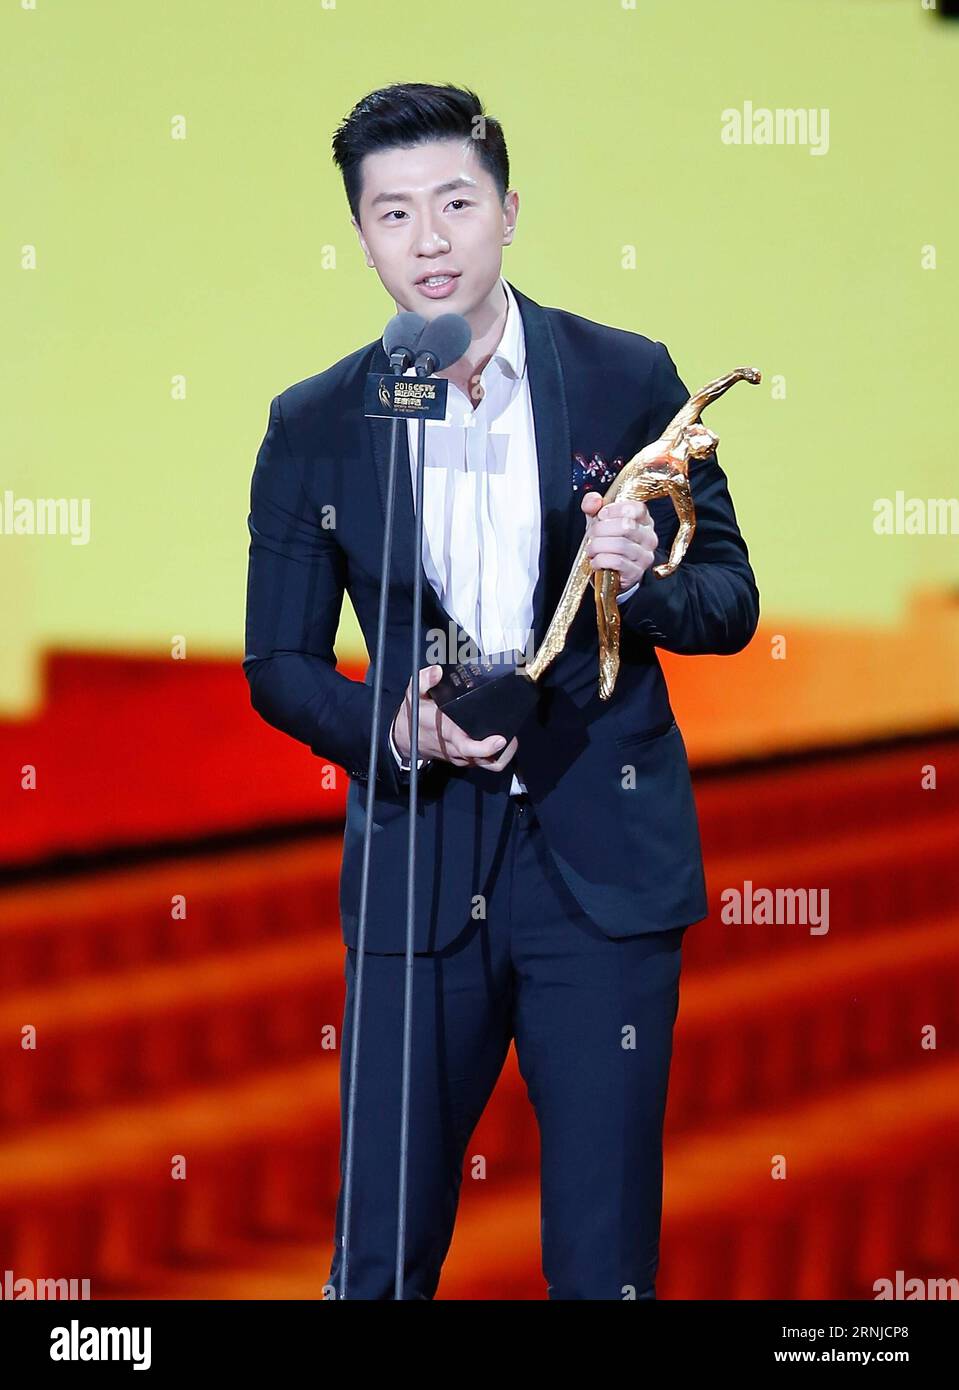 Table tennis Grand-Slam winner Ma Long poses the Best Male Athletes of the Year 2016 at the prestigious China s Central Television (CCTV) Sports Awards gala in Beijing, capital of China, Jan. 15, 2017. Wang Lili) (SP)CHINA-BEIJING-CCTV SPORTS AWARDS GALA(CN) DingXu PUBLICATIONxNOTxINxCHN   Table Tennis Grand Slam Winner MA Long Poses The Best Male Athletes of The Year 2016 AT The prestigious China S Central Television CCTV Sports Awards Gala in Beijing Capital of China Jan 15 2017 Wang Lili SP China Beijing CCTV Sports Awards Gala CN  PUBLICATIONxNOTxINxCHN Stock Photo